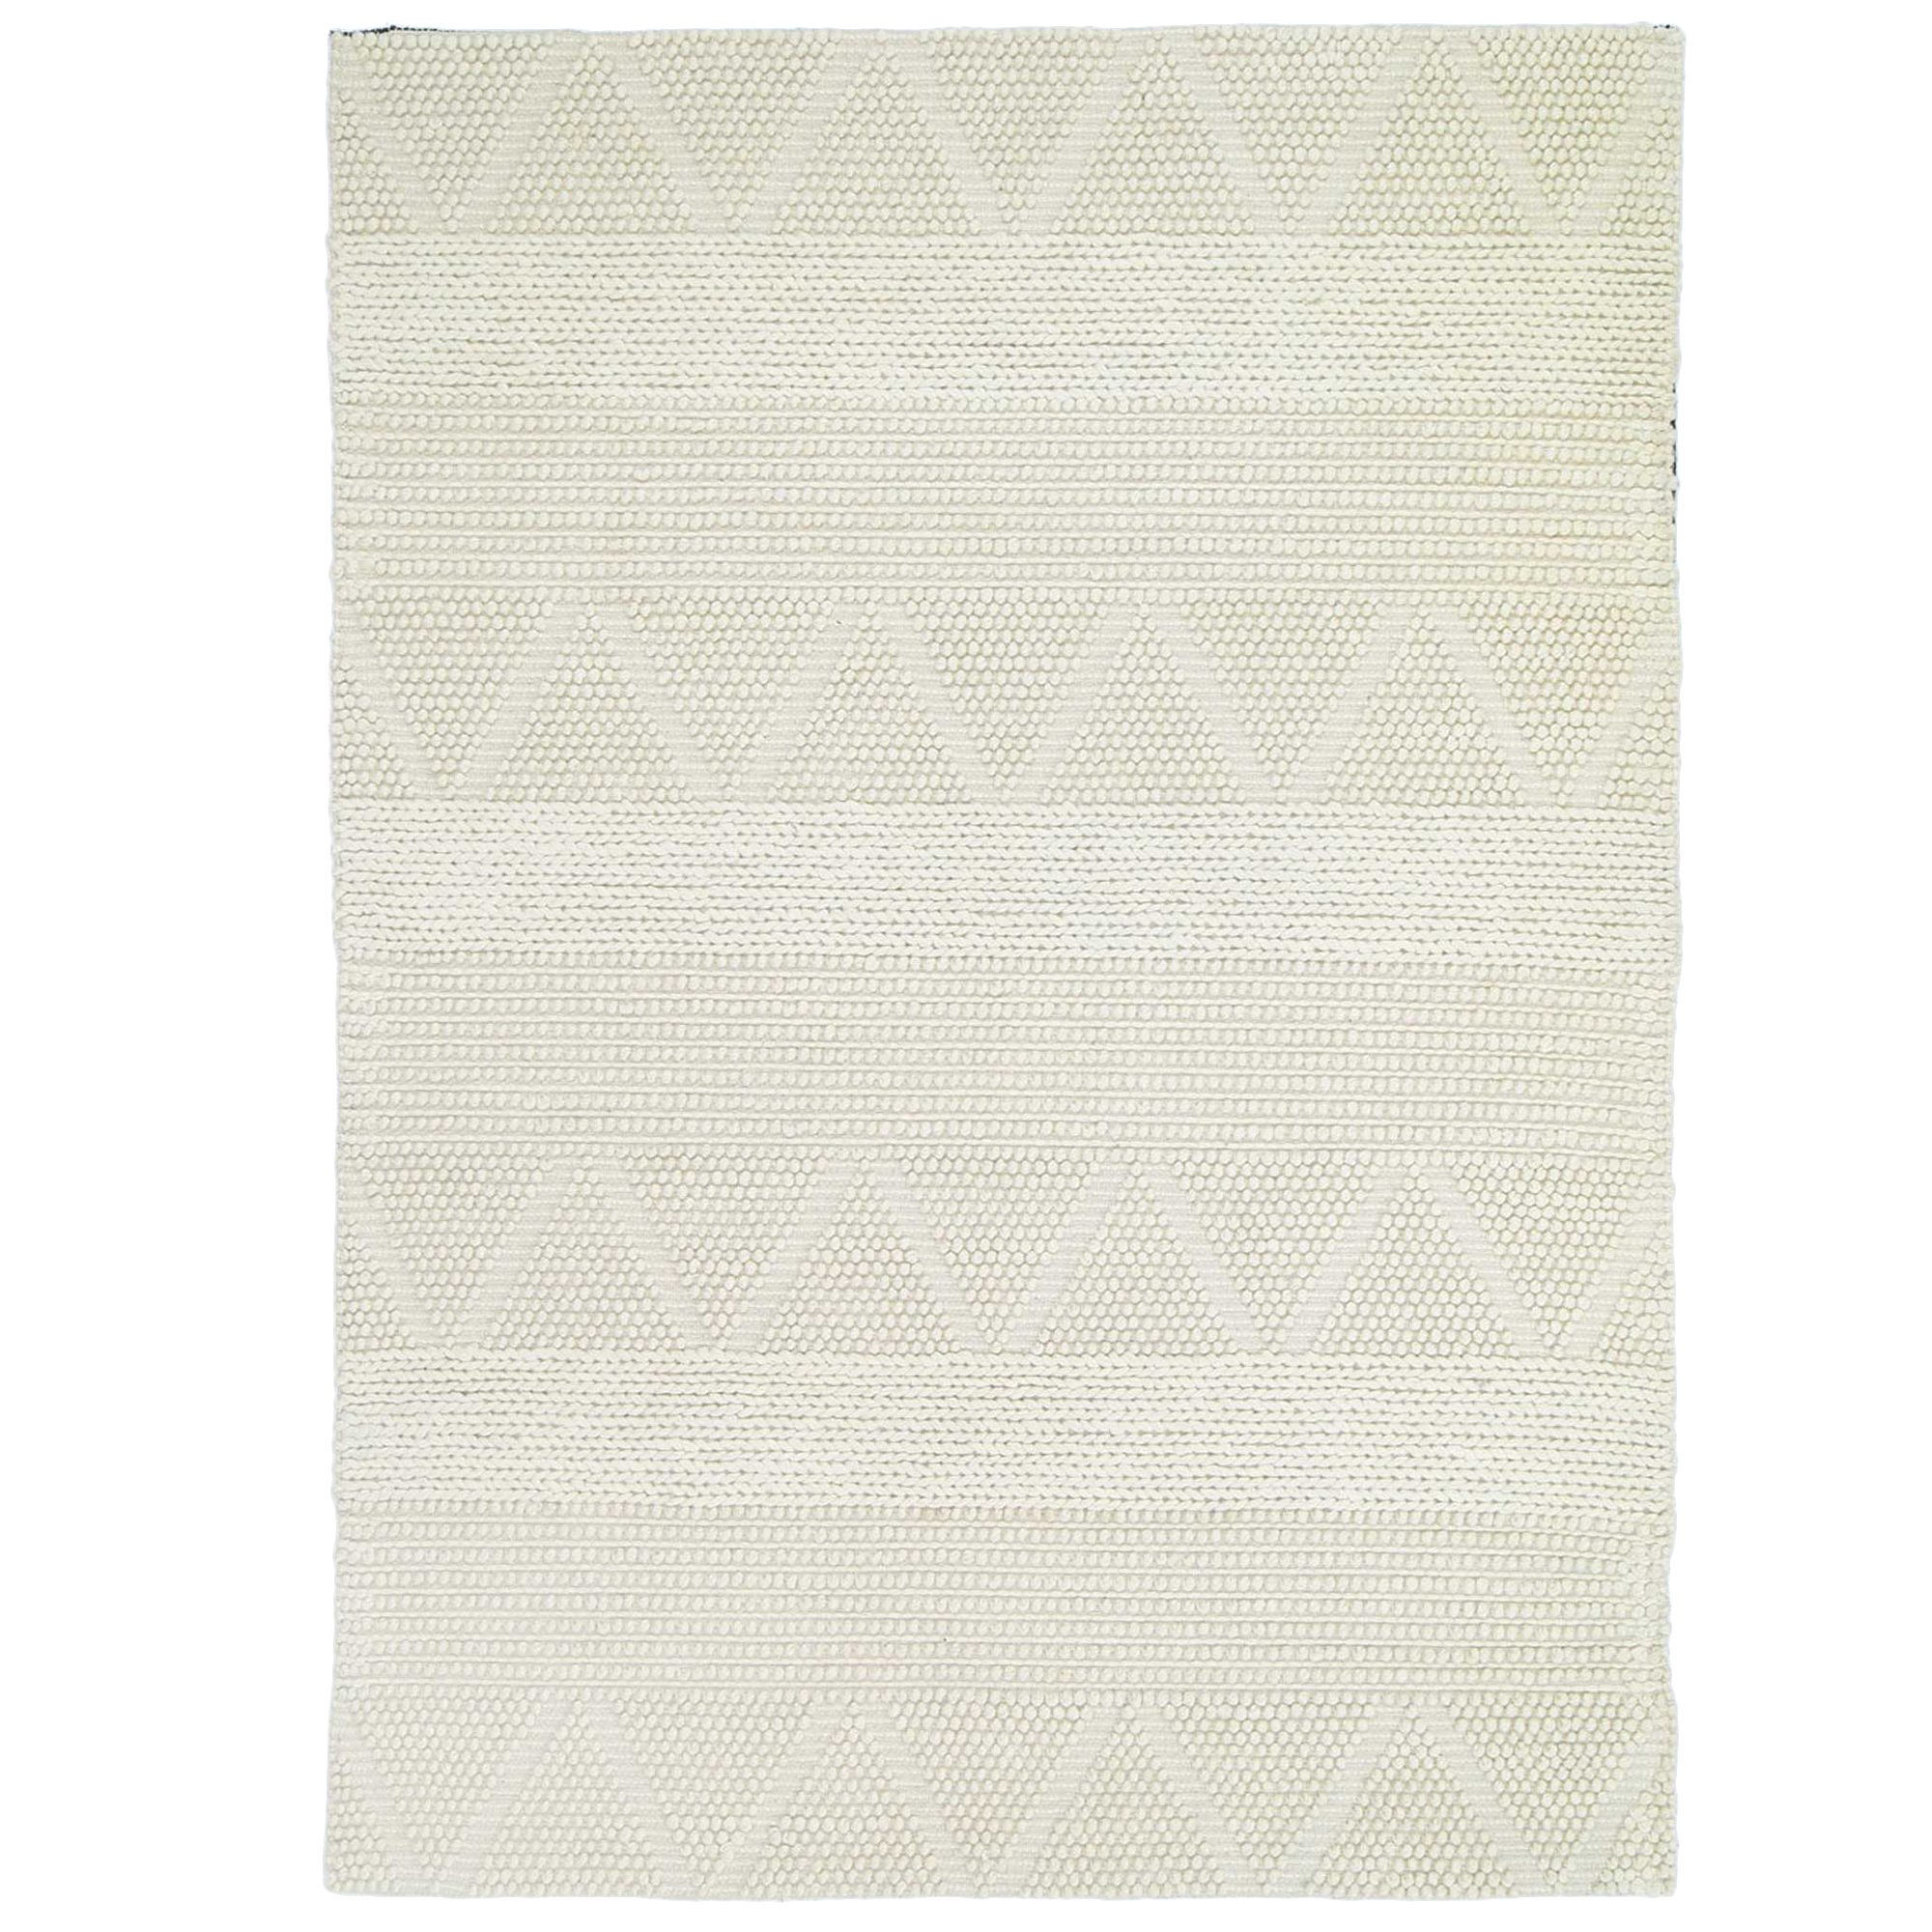 Lifestyle Floors Ivory African Inspired, African Inspired Rugs